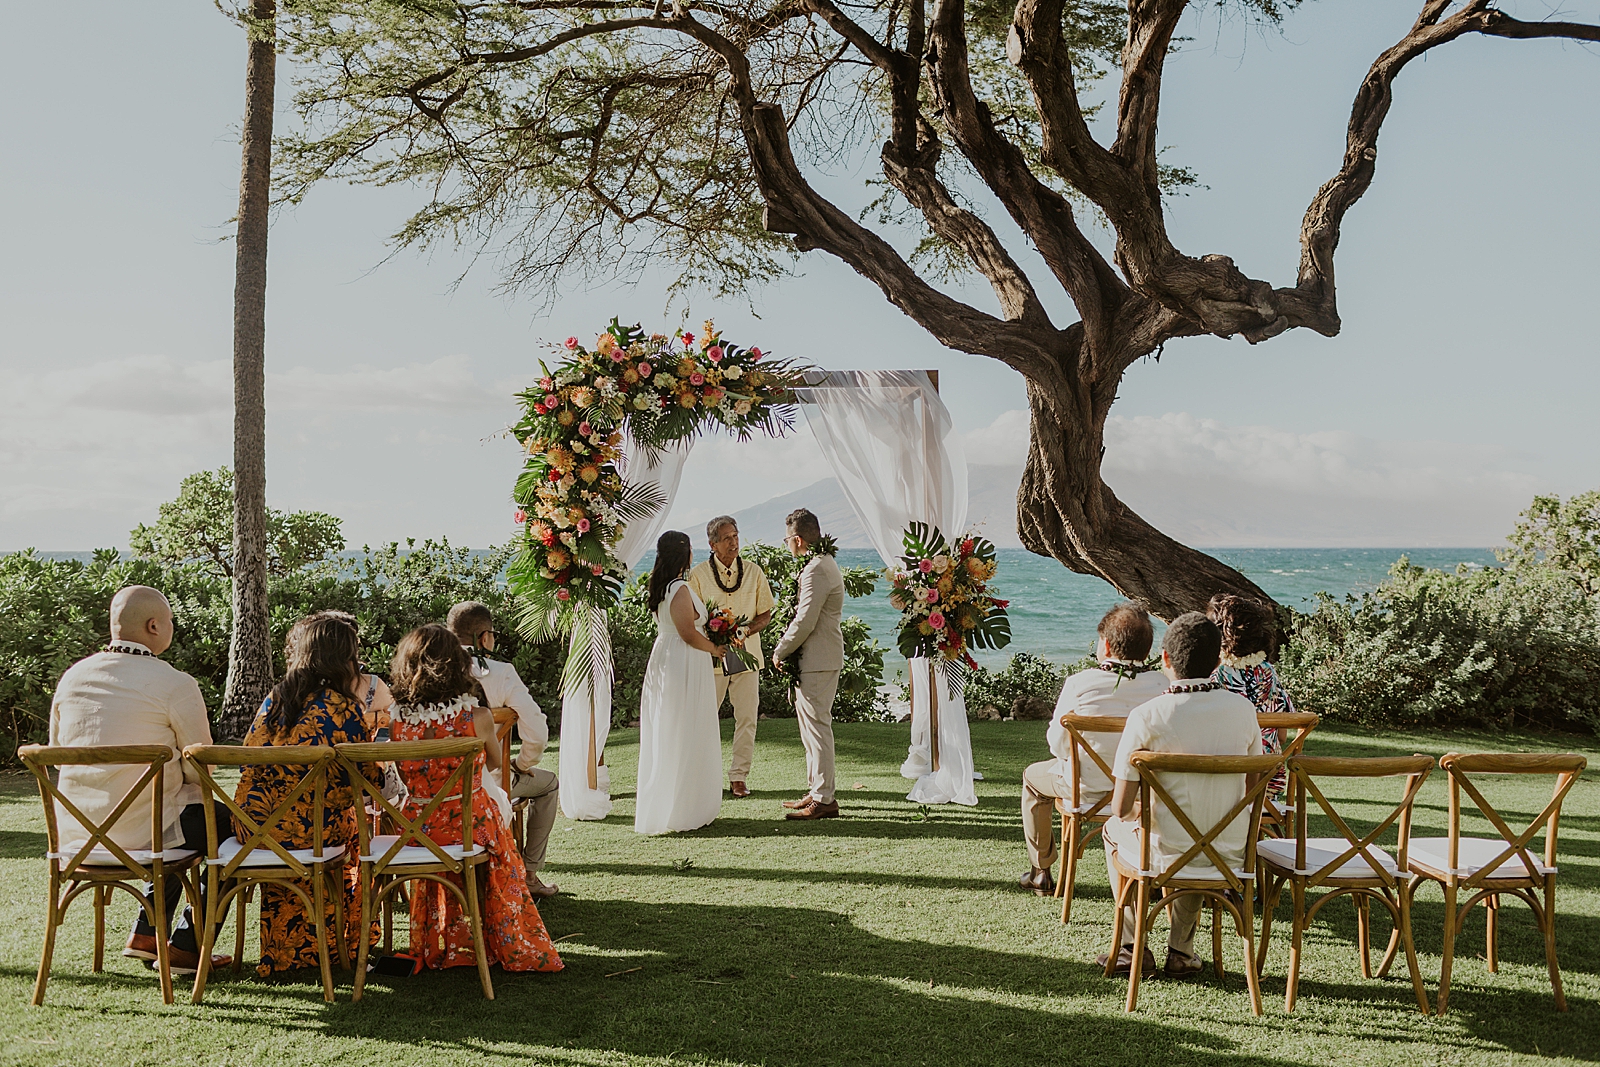 Wide shot of intimate Wedding Ceremony in front of the ocean on grass